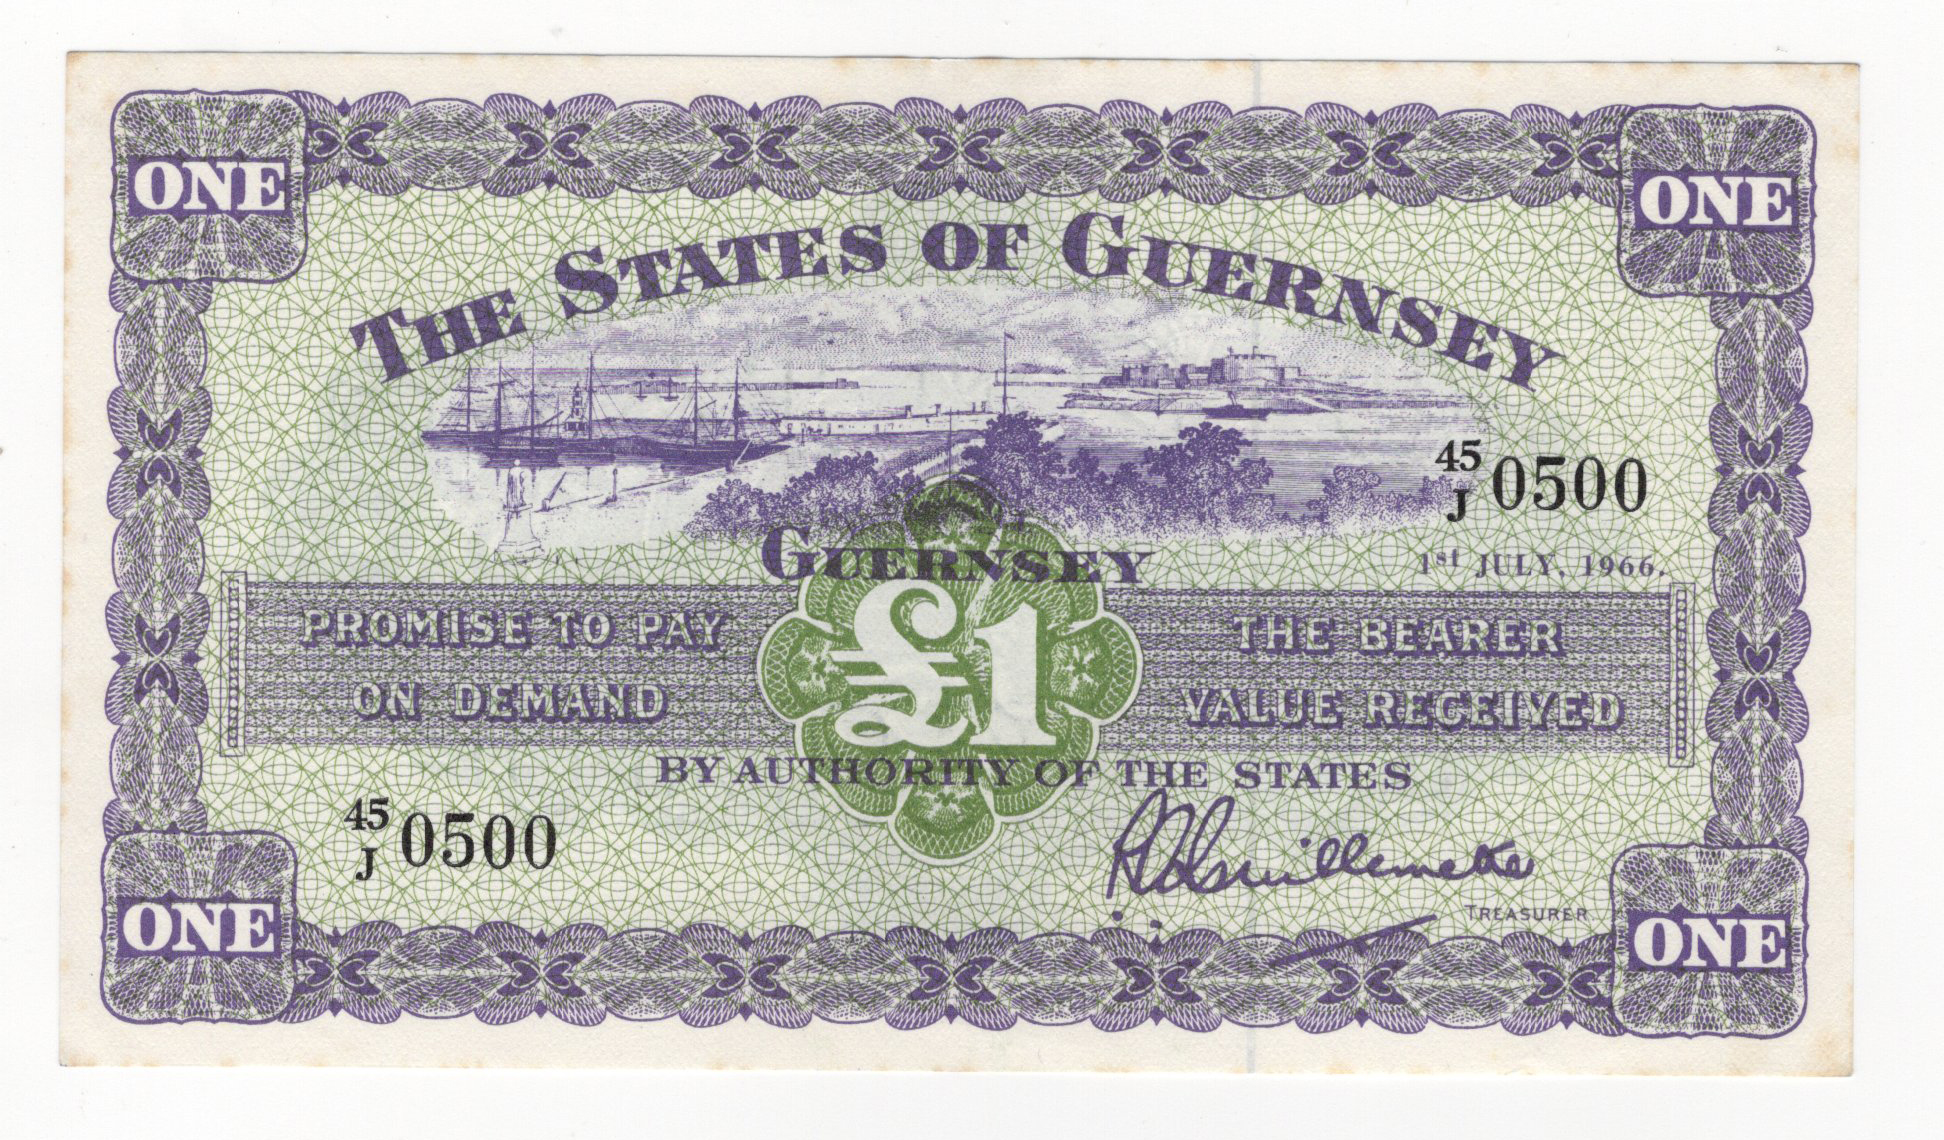 Guernsey 1 Pound dated 1st July 1966, signed Guillemette, nice serial number 45/J 0500 (TBB B148u,